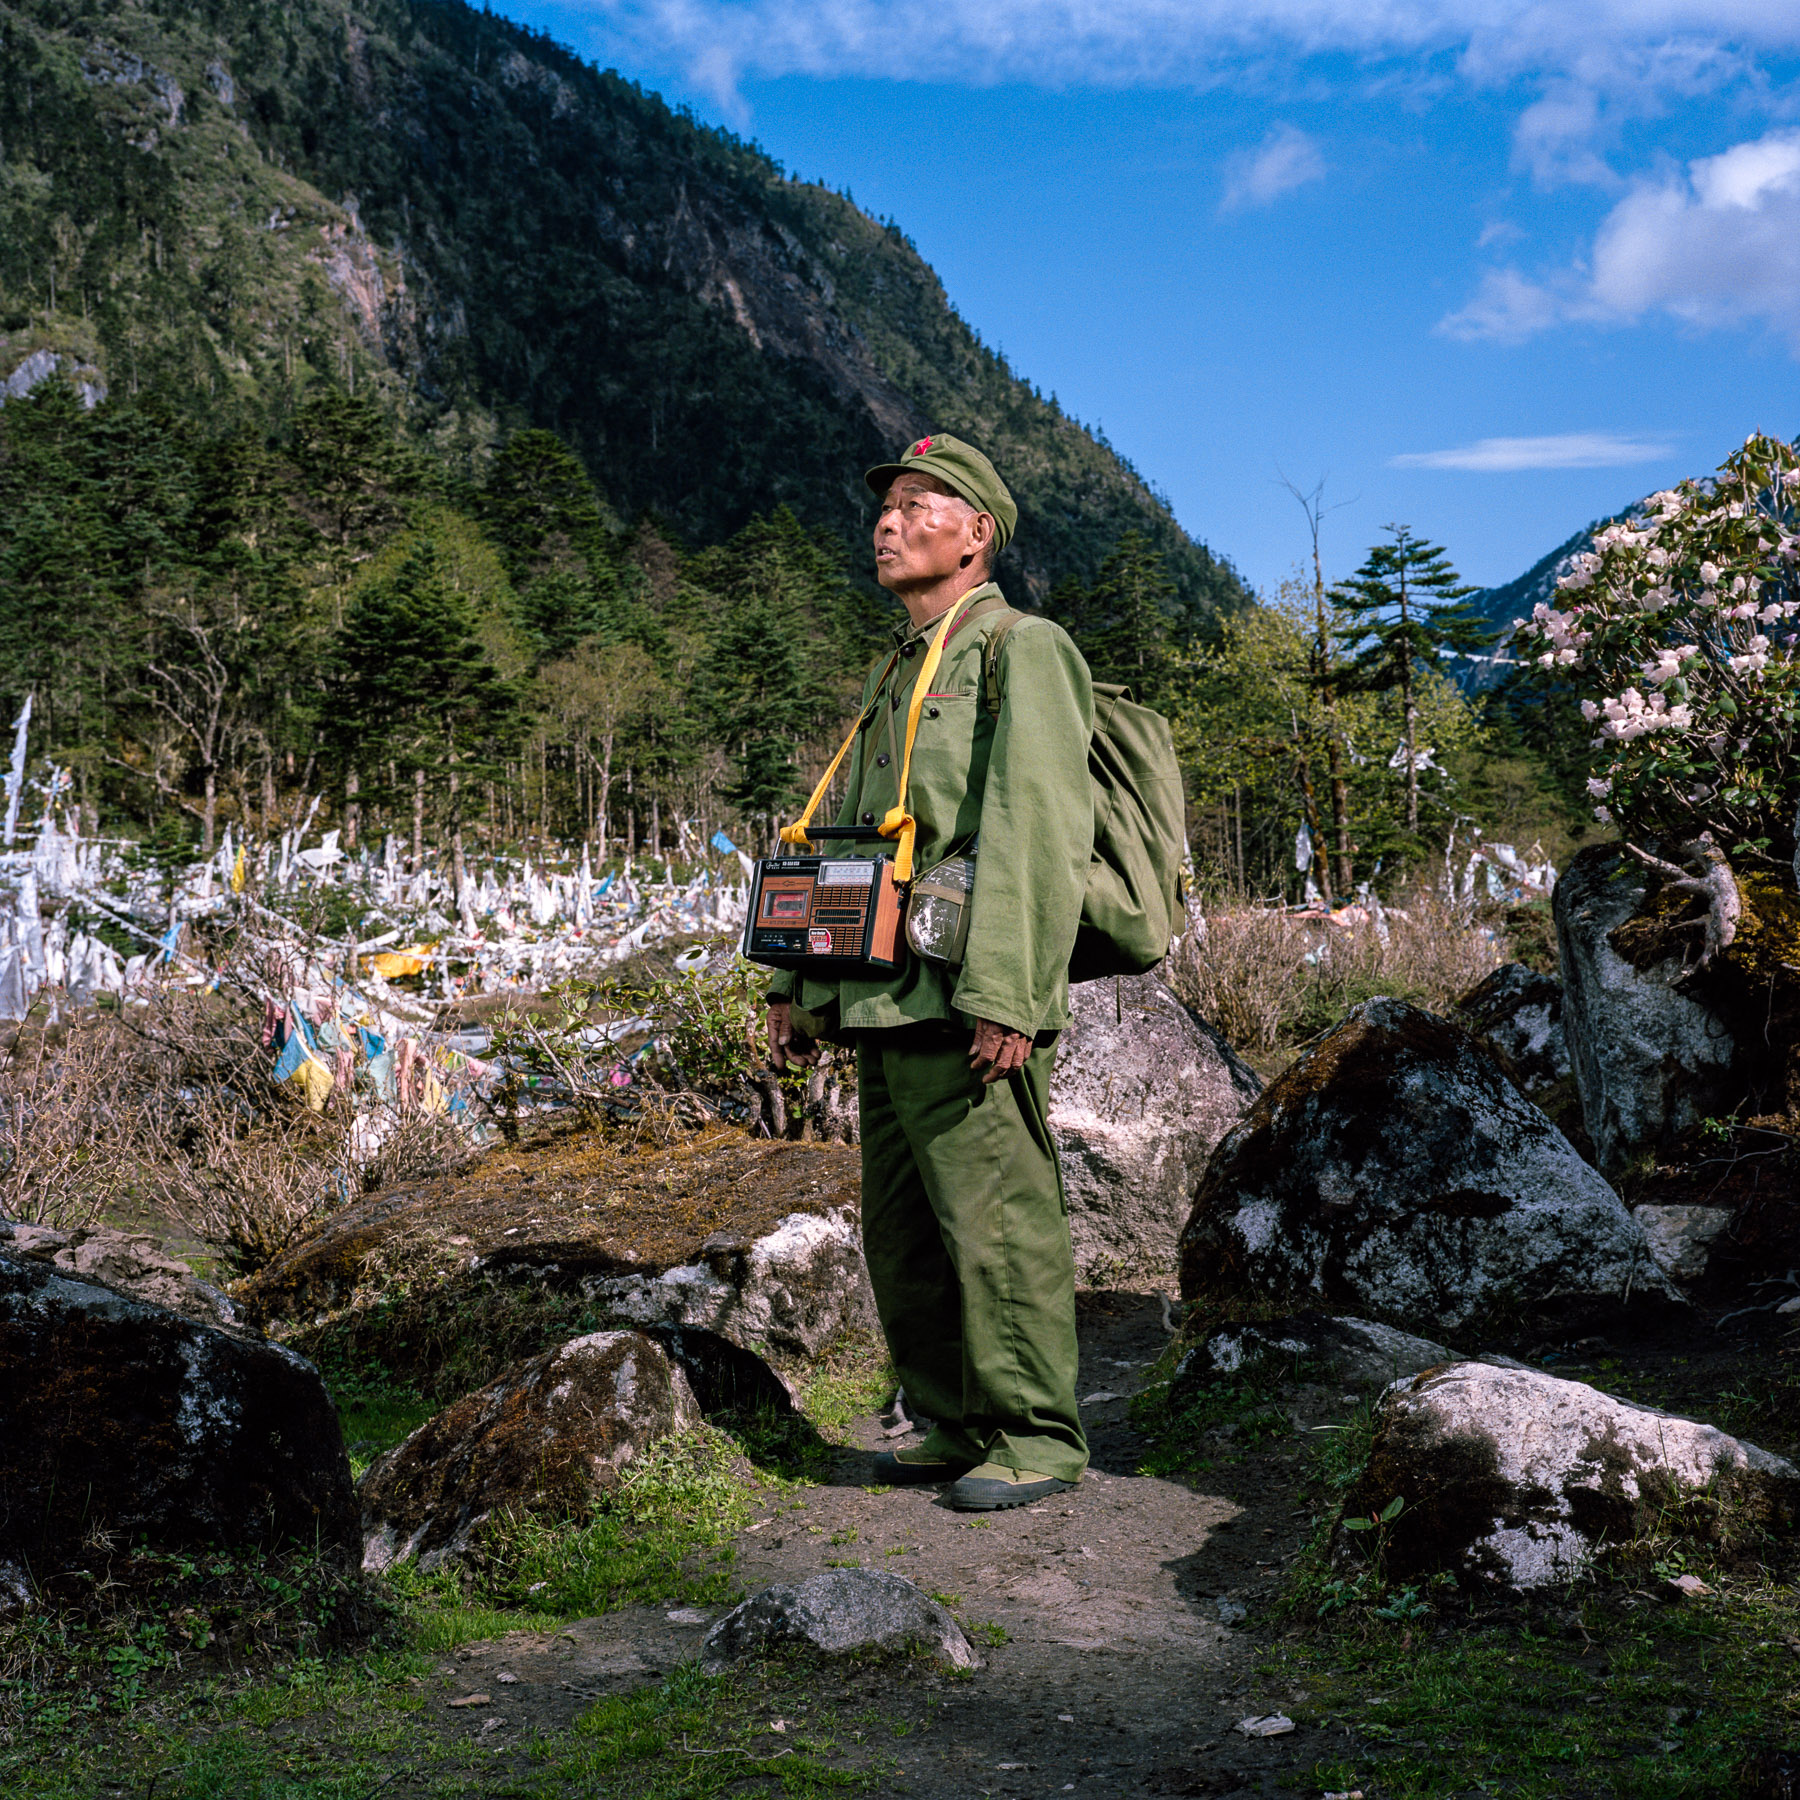  May 2012. Yunnan province, China. Professional Tibetan pilgrim (trekking around the sacred Kawa Karpo mountain on behalf of other Tibetans who cannot do it themselves).Location: At the foothill of the Duokela Pass (3600m). on the trail of the buddhi